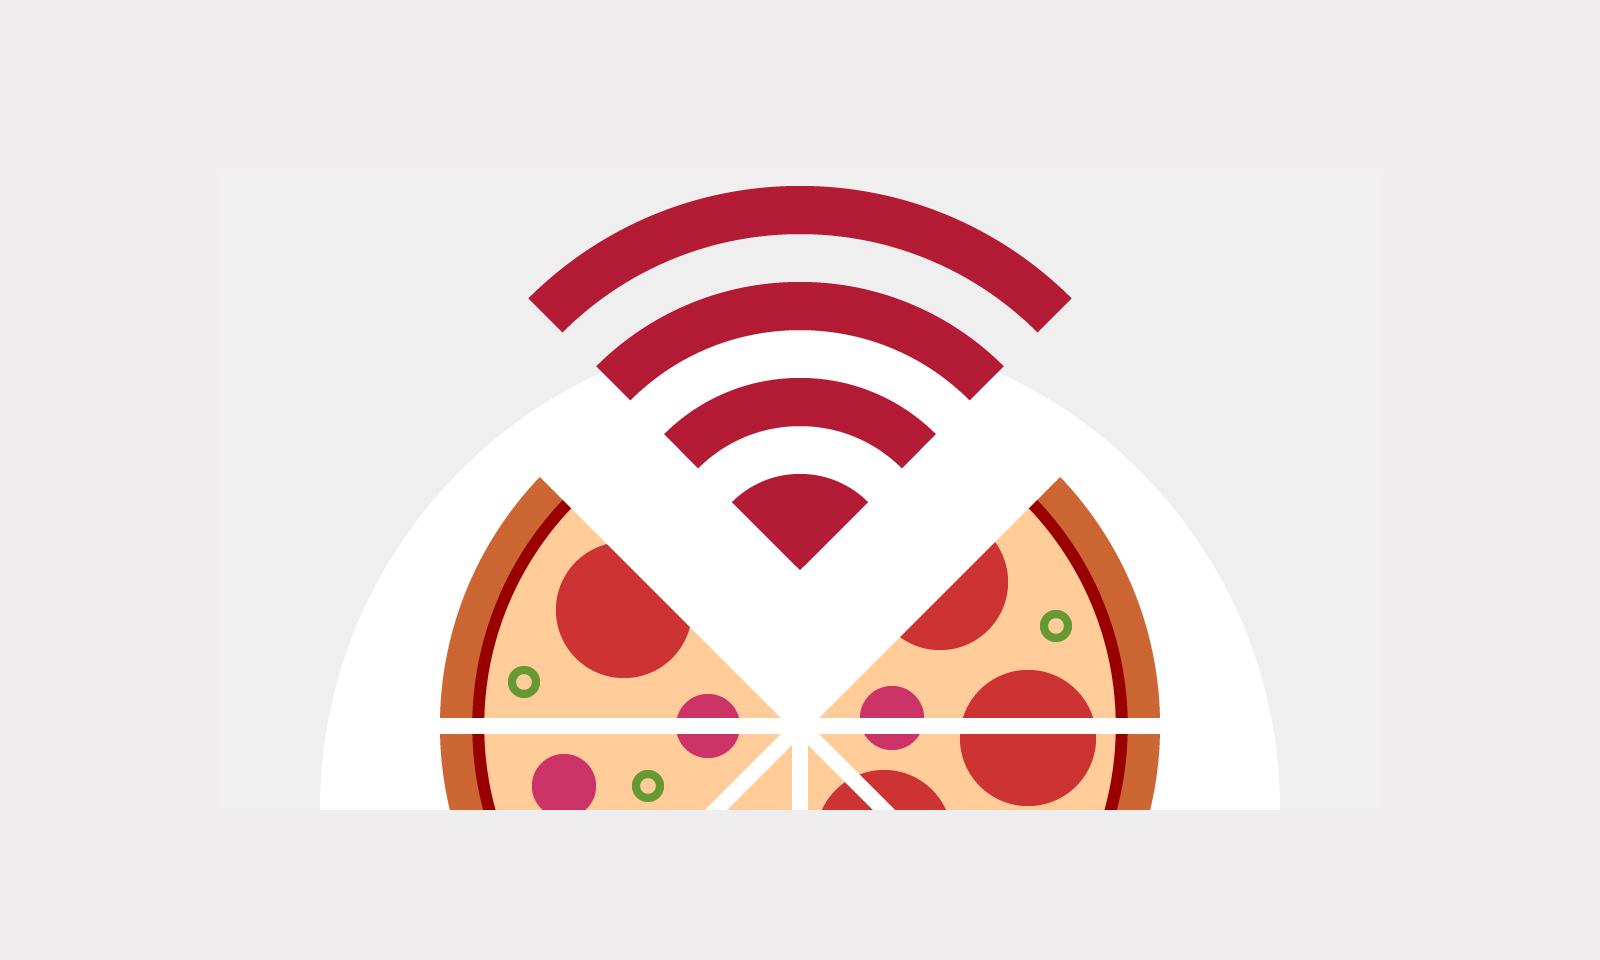 Illustration of a sliced pizza with a wifi icon taking the place of two slices